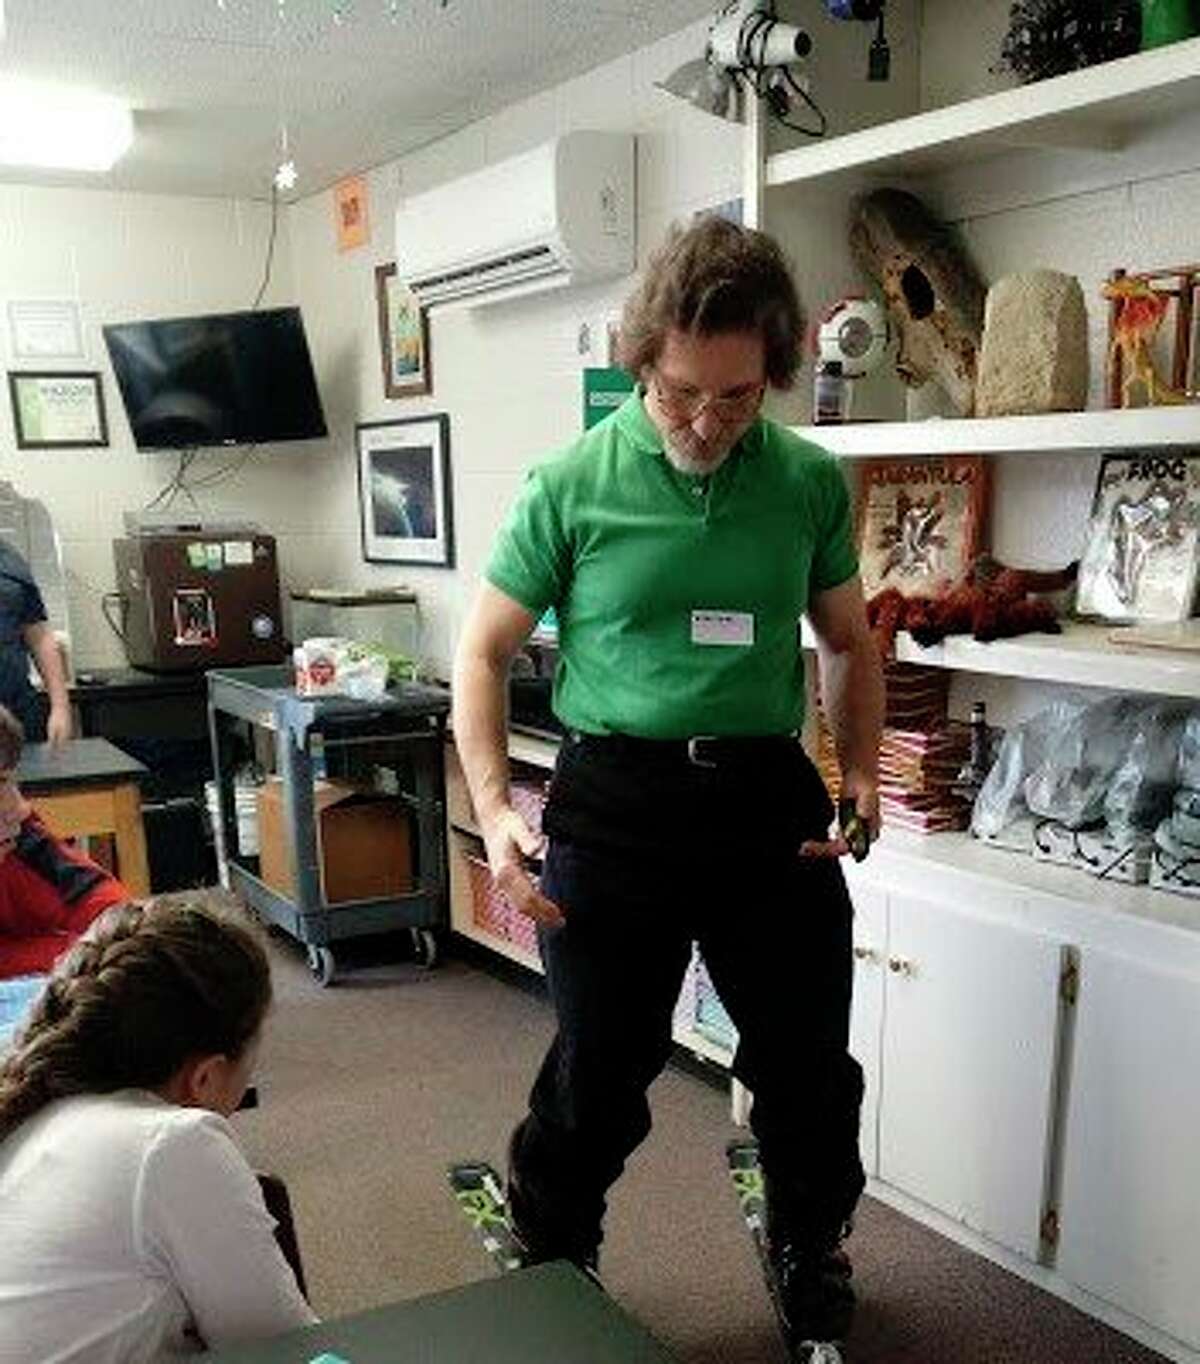 Dr. Edmund Stark, a researcher from MSU St. Andrews, gives St. John's Lutheran School students a demonstration of the physics of skiing. (Photo provided)